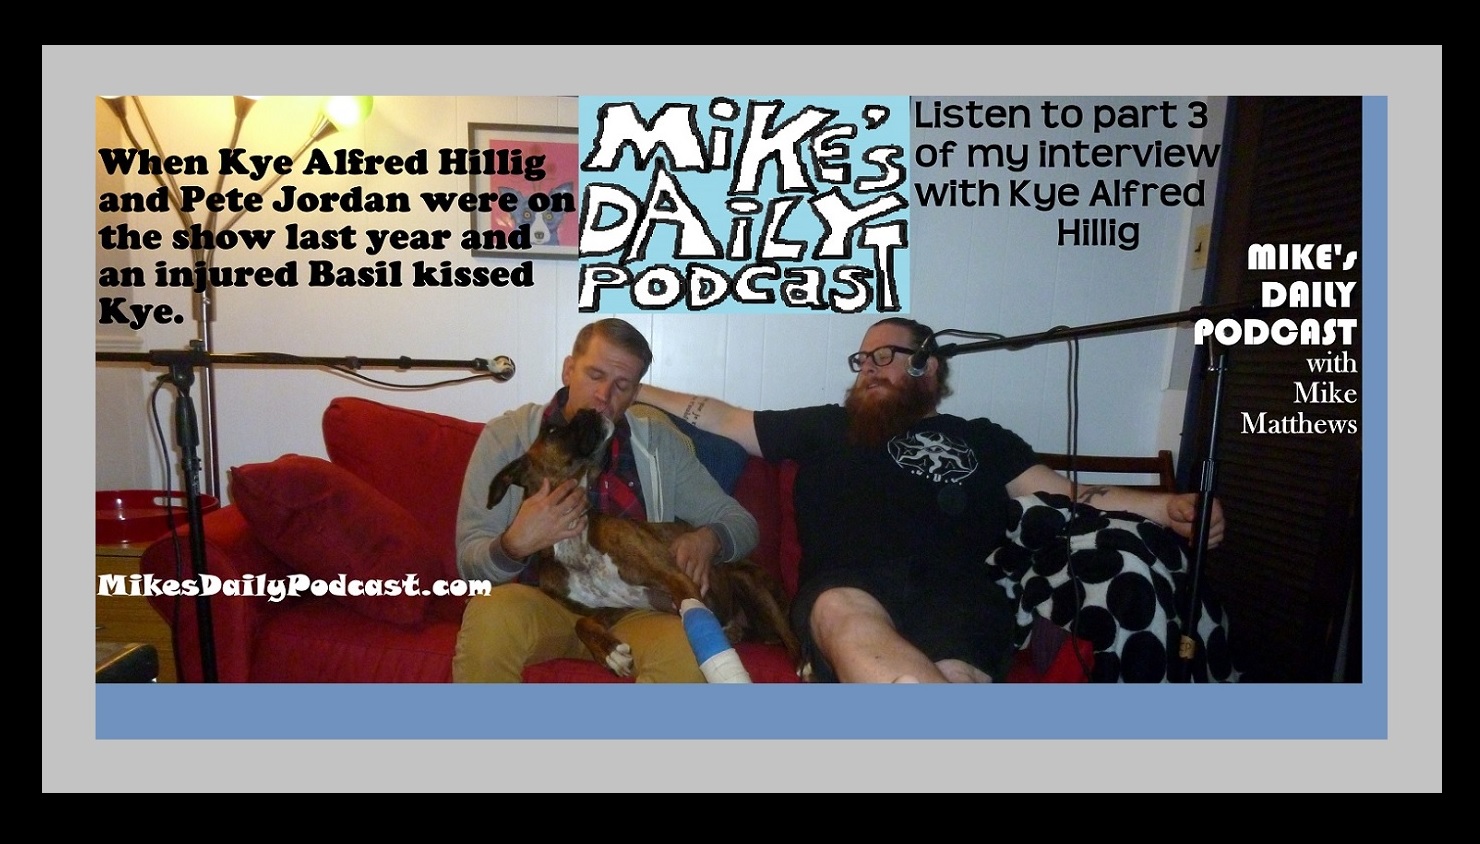 MIKEs DAILY PODCAST 1014 Kye Alfred Hillig and Pete Jordan